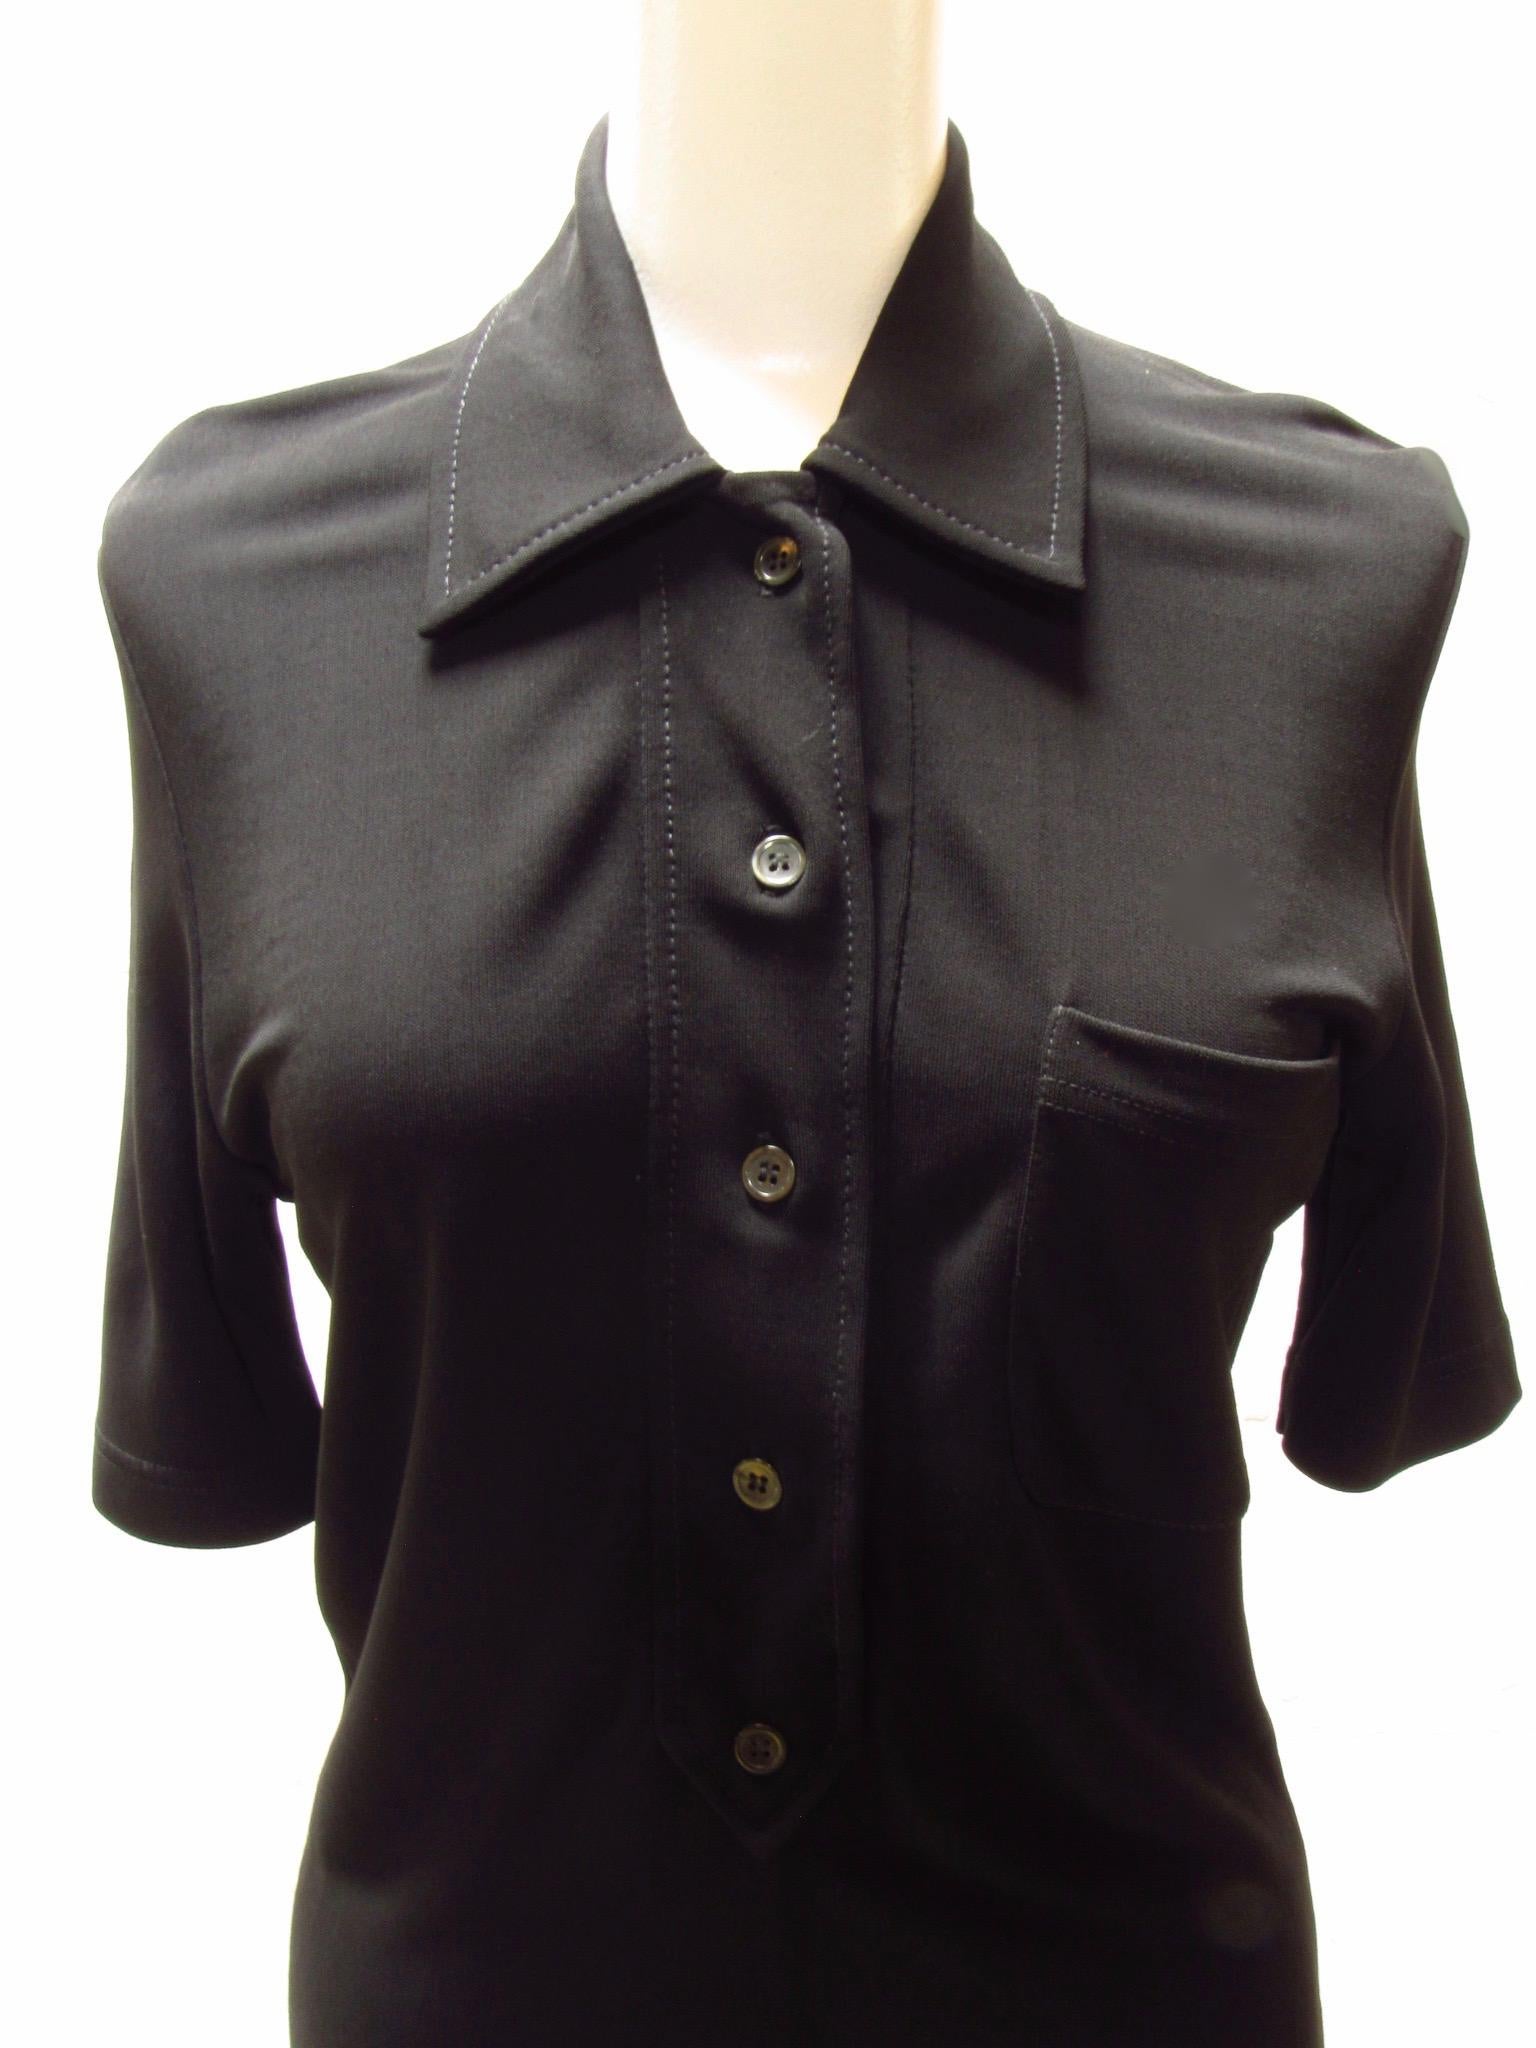 Classic black polo from vintage Paco Rabanne is 100% viscose. IT has one small breast pocket.